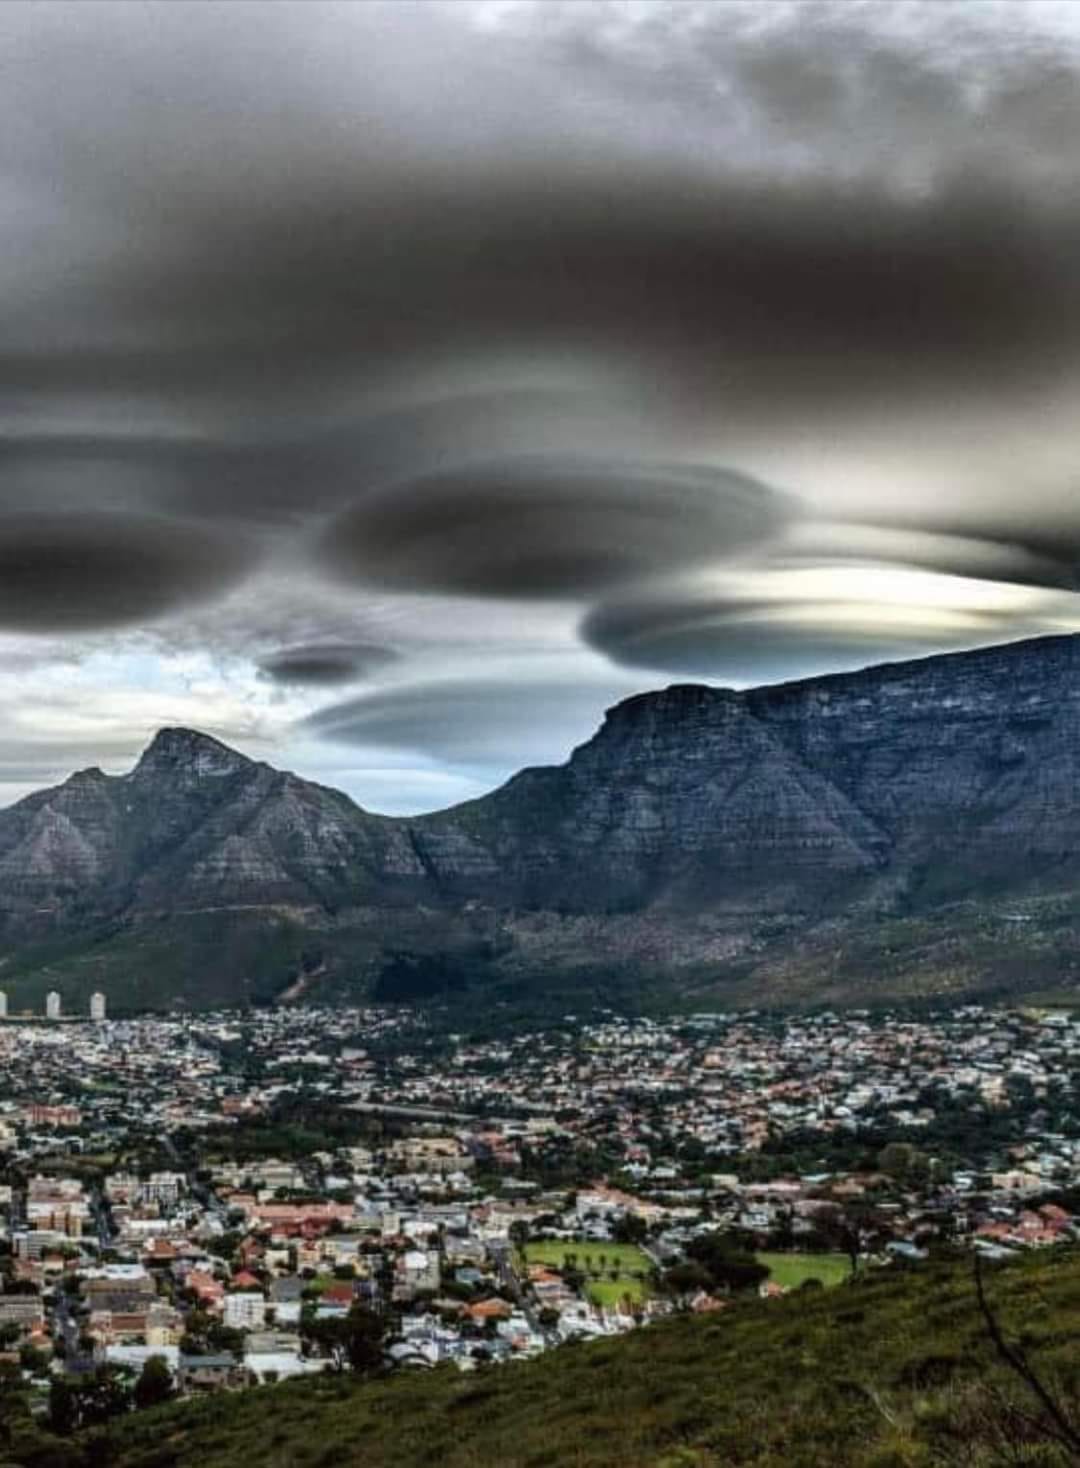 Strange clouds were recorded in South Africa